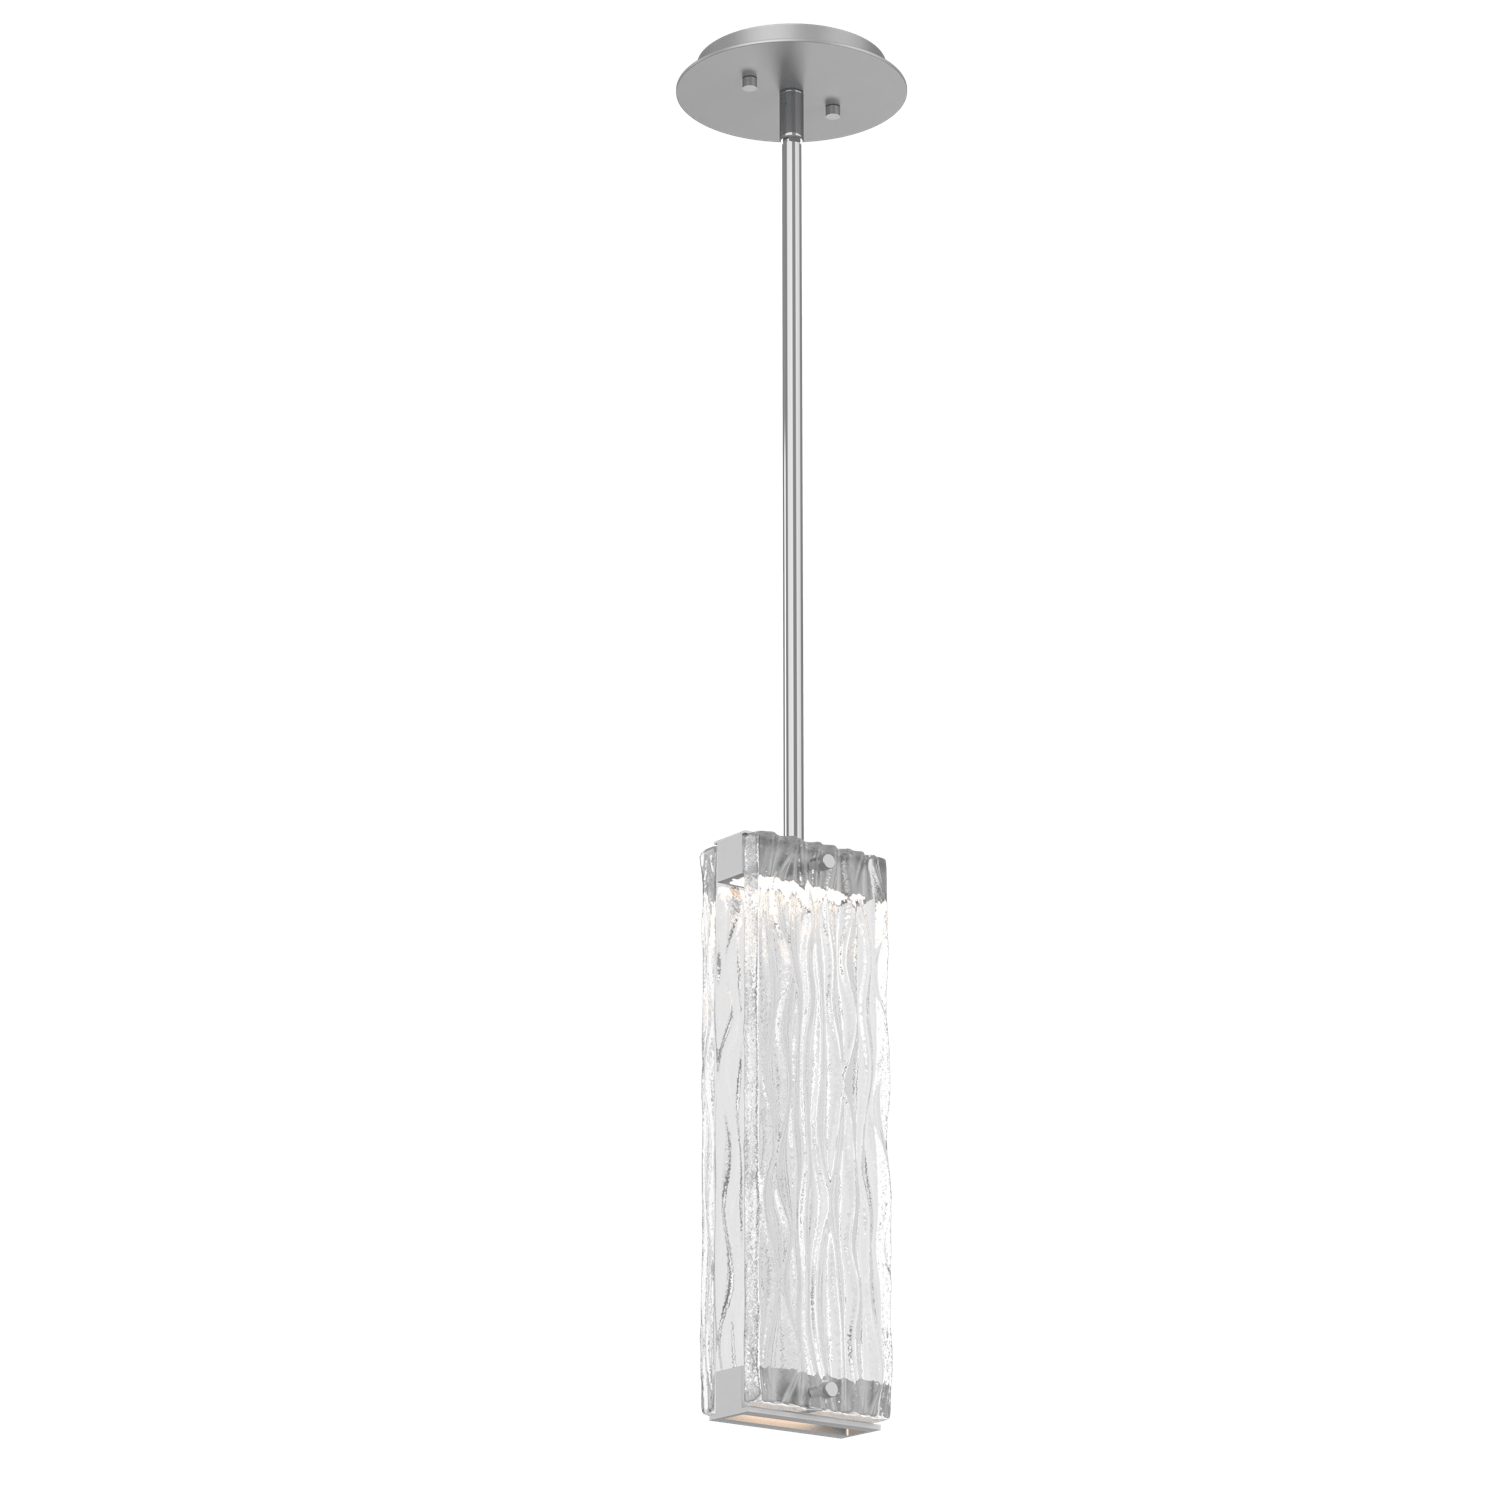 LAB0090-01-CS-TT-Hammerton-Studio-Tabulo-pendant-light-with-classic-silver-finish-and-clear-tidal-cast-glass-shade-and-LED-lamping